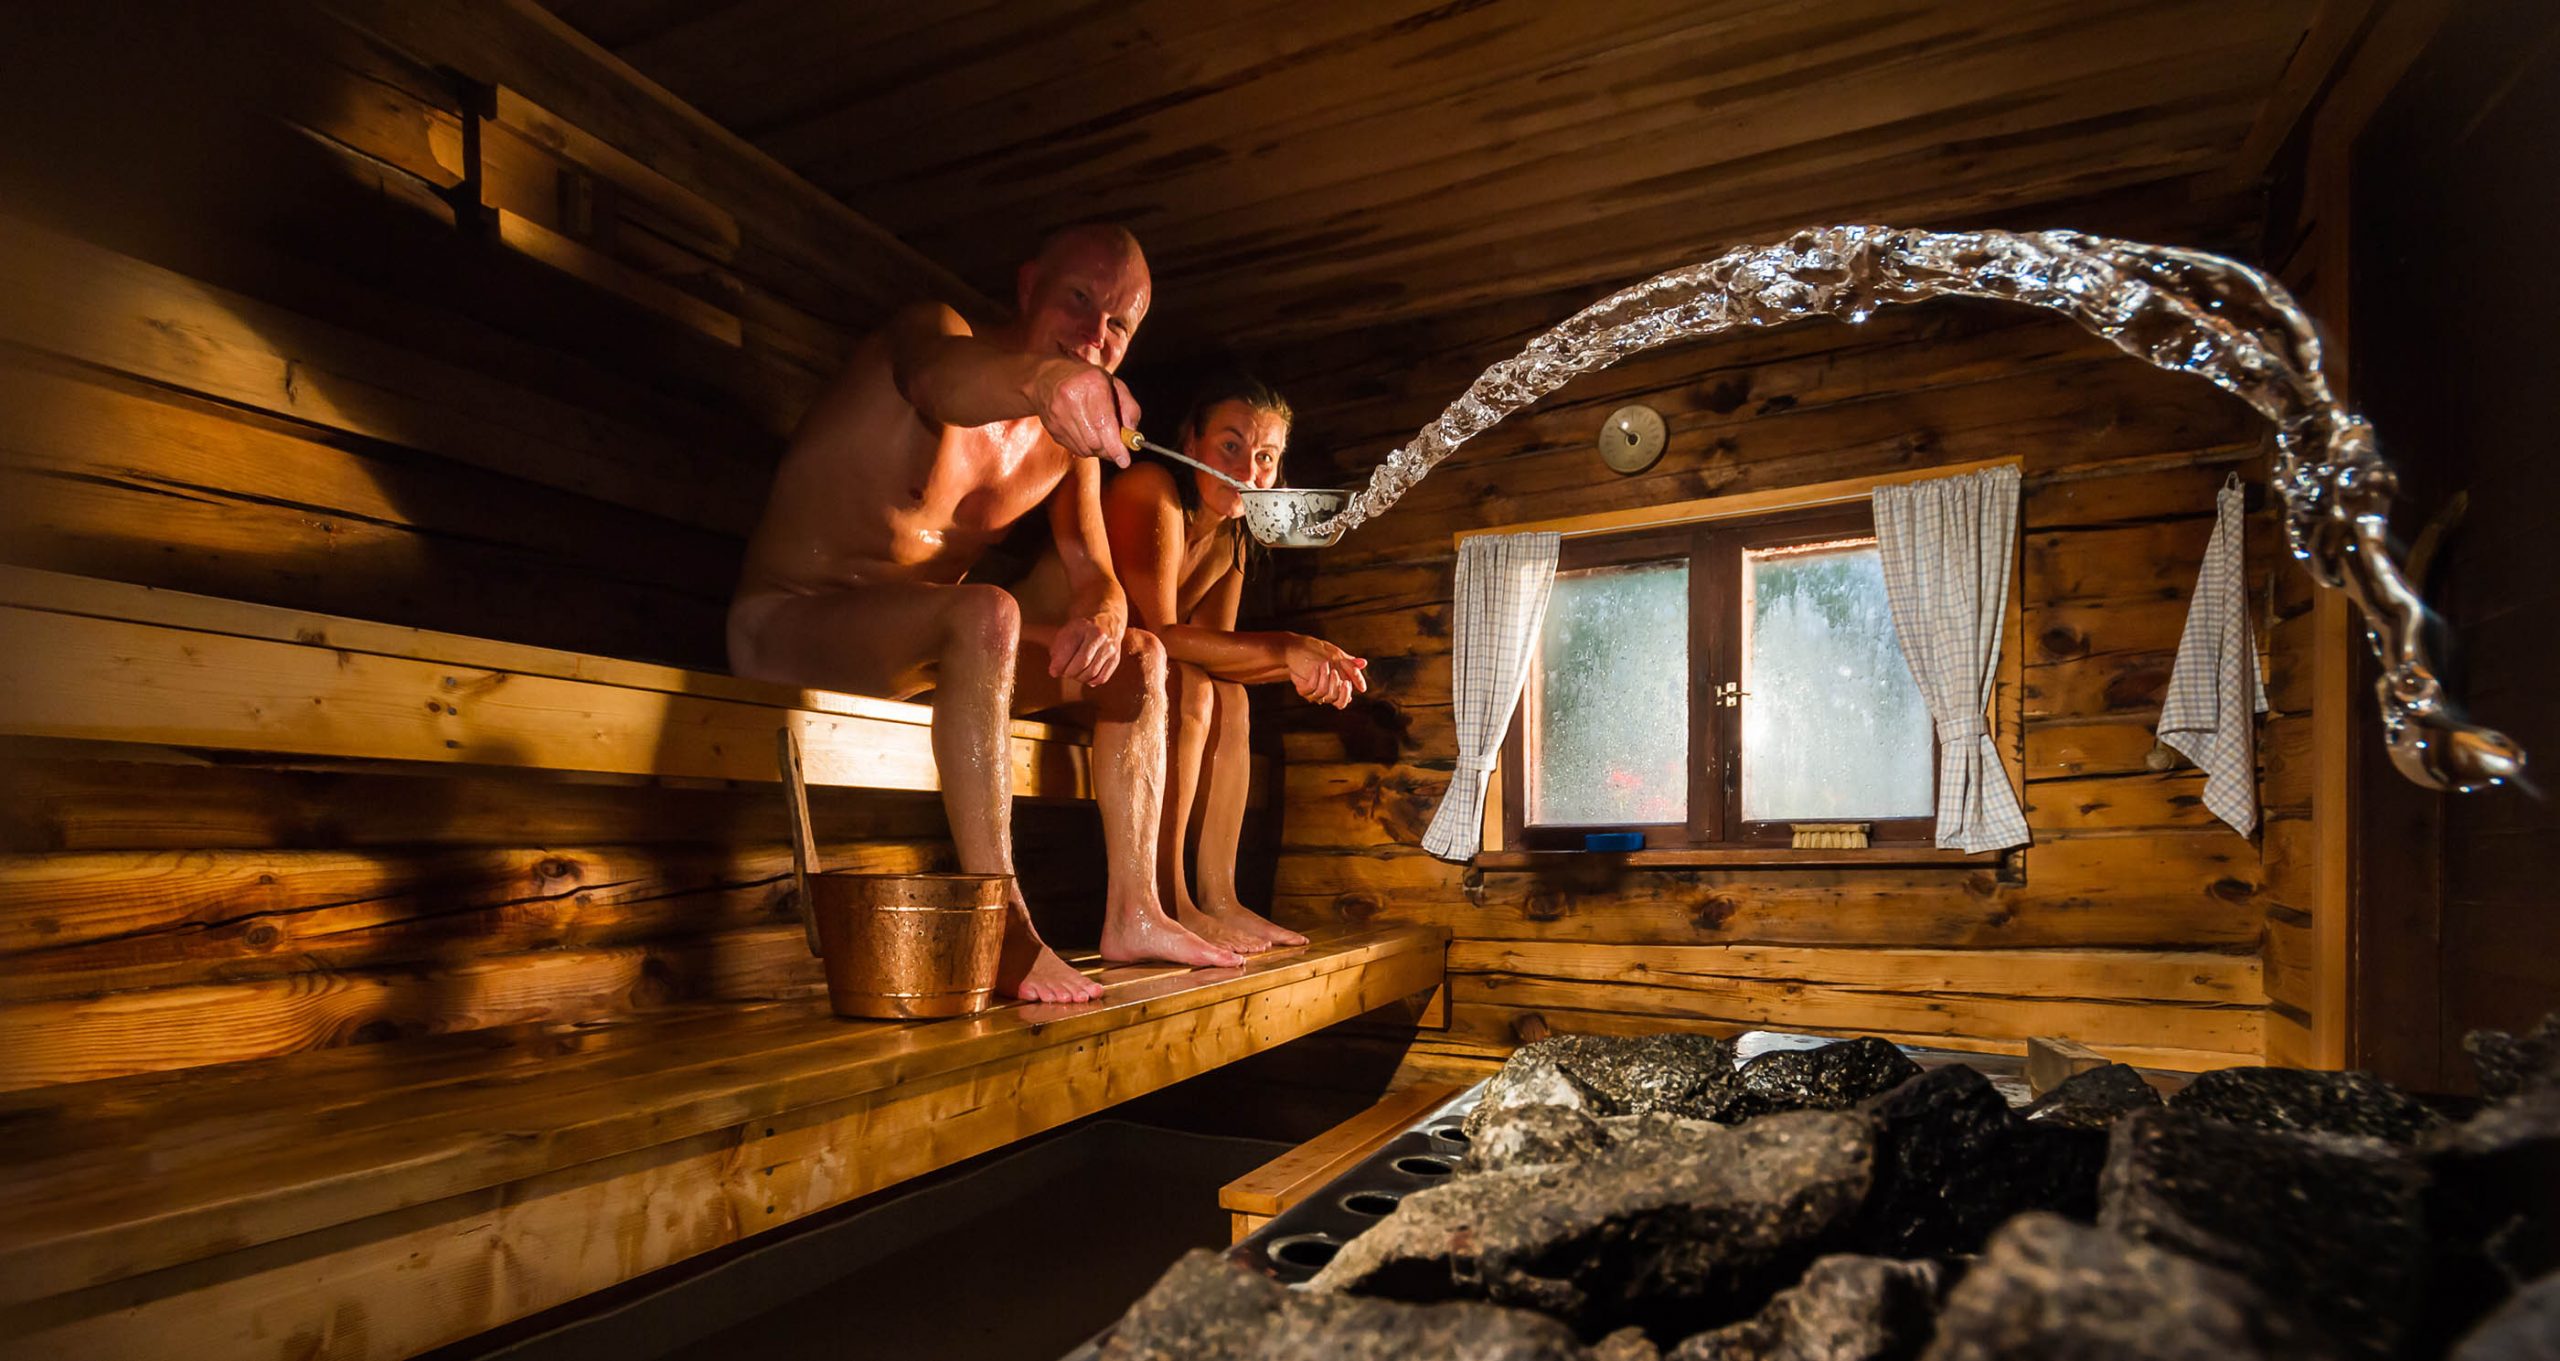 Middle aged couple in traditional wooden Finnish sauna, man throwing water to hot stove